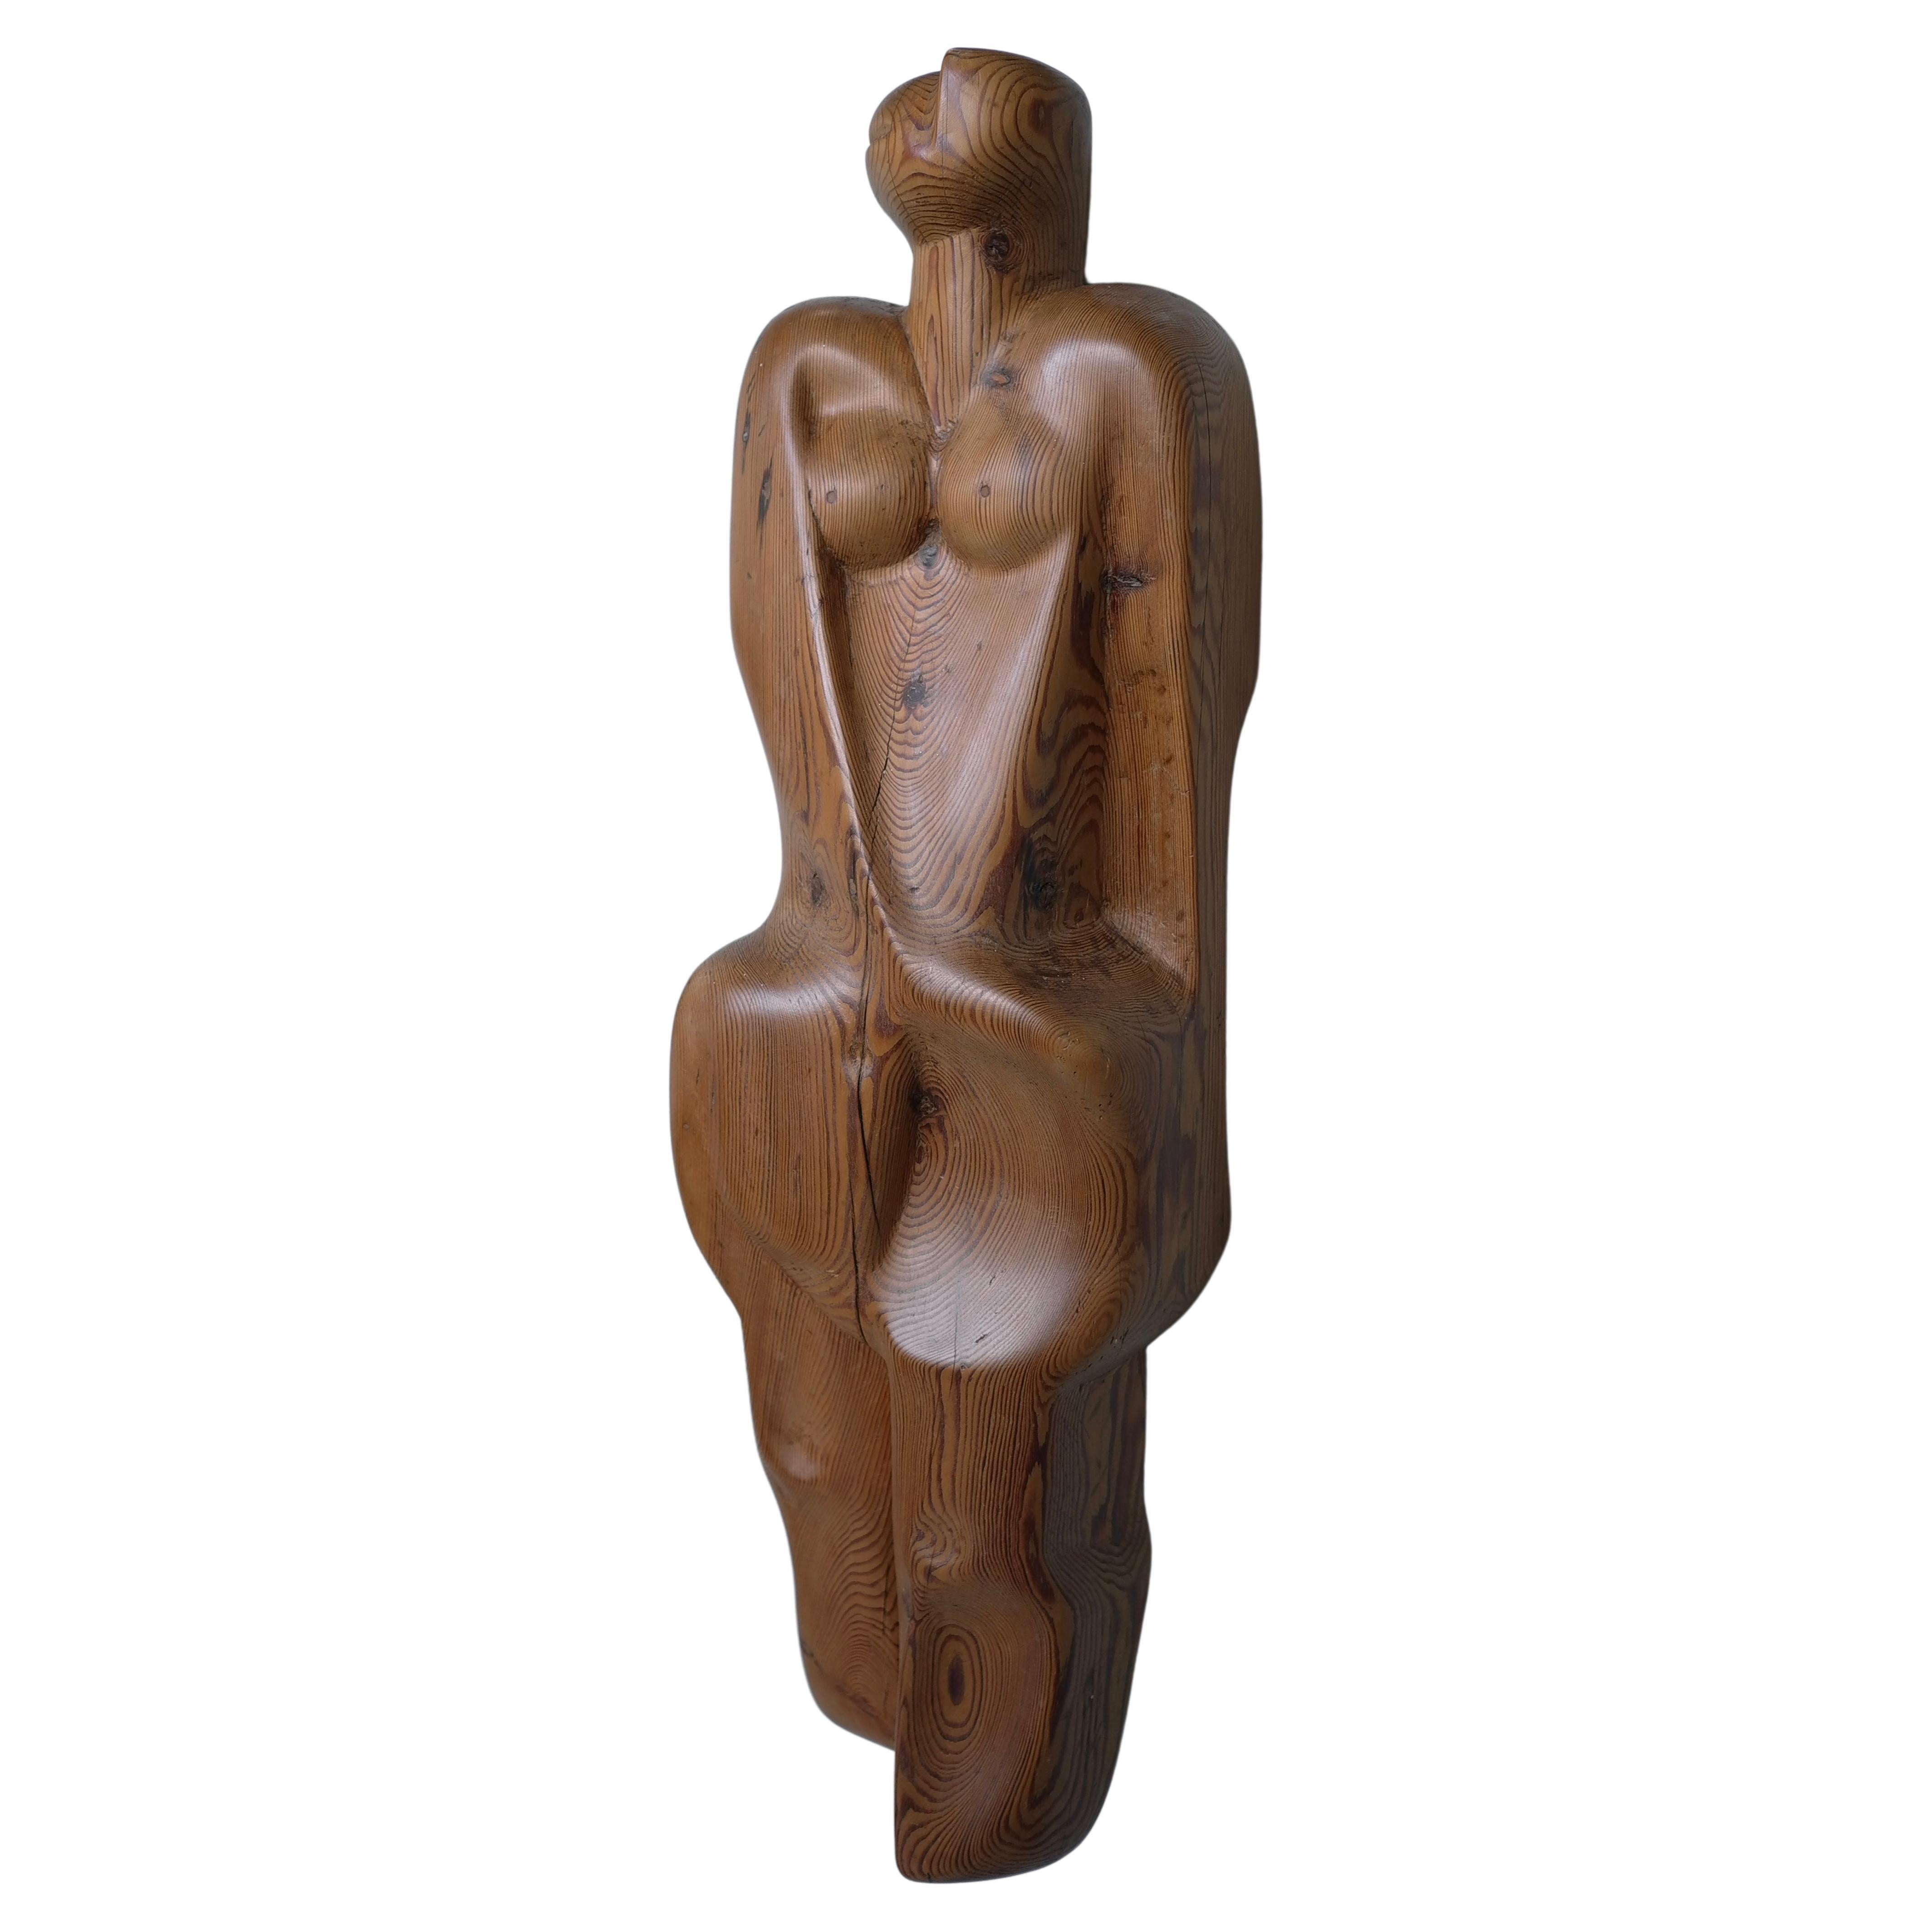 Abstract Wooden Wall Art , Women Figure by Cor Dam, Delft The Netherlands 1958 For Sale